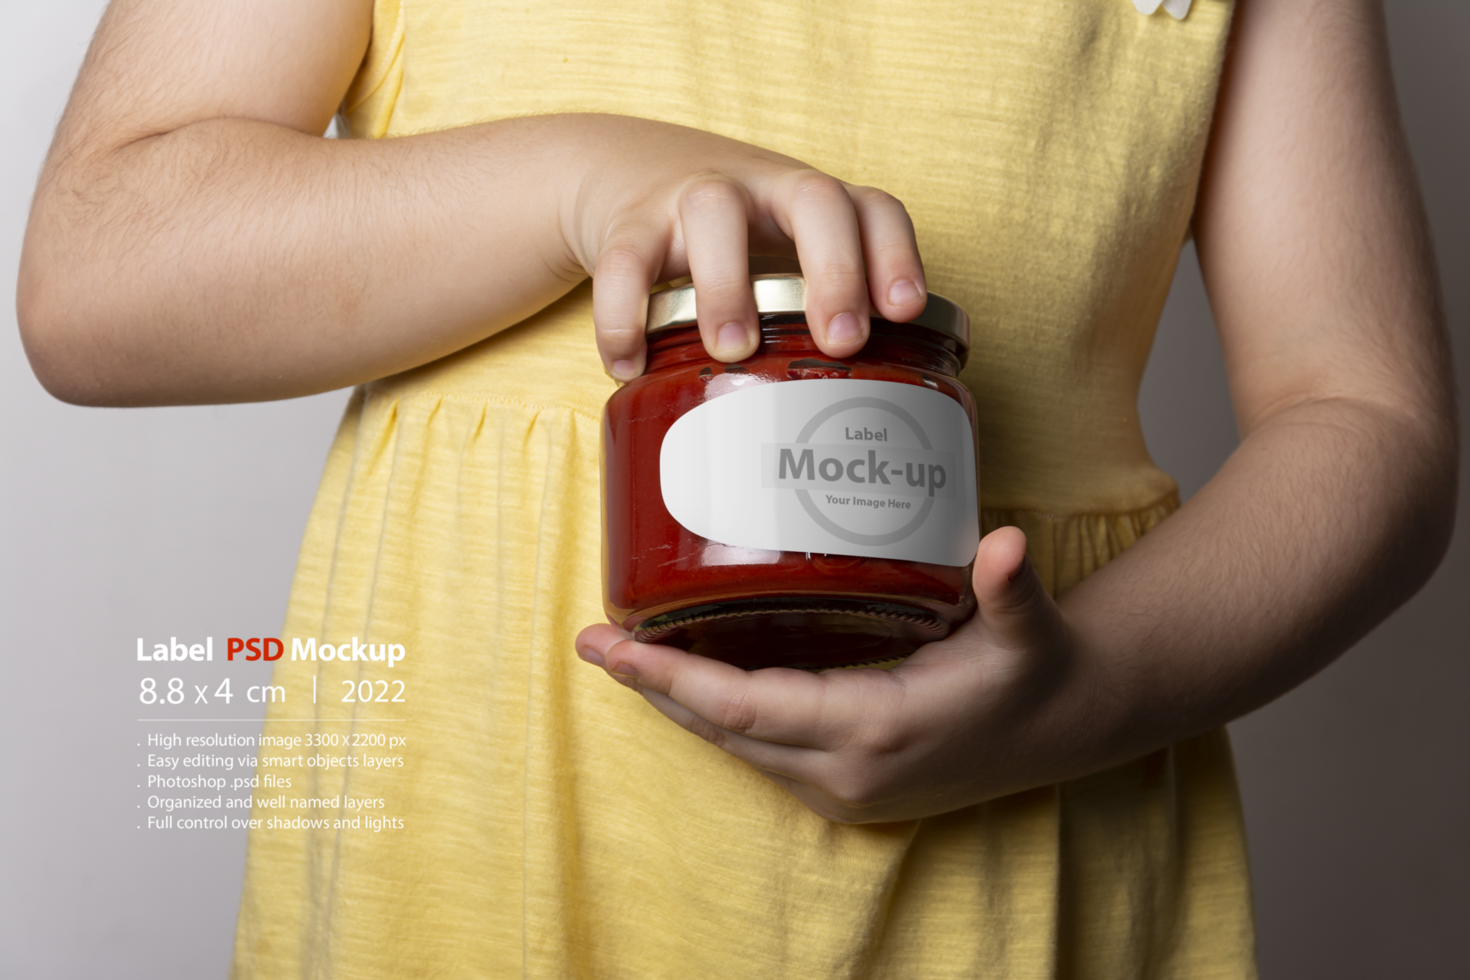 Little girl opening a tomato paste jar cap by hands psd